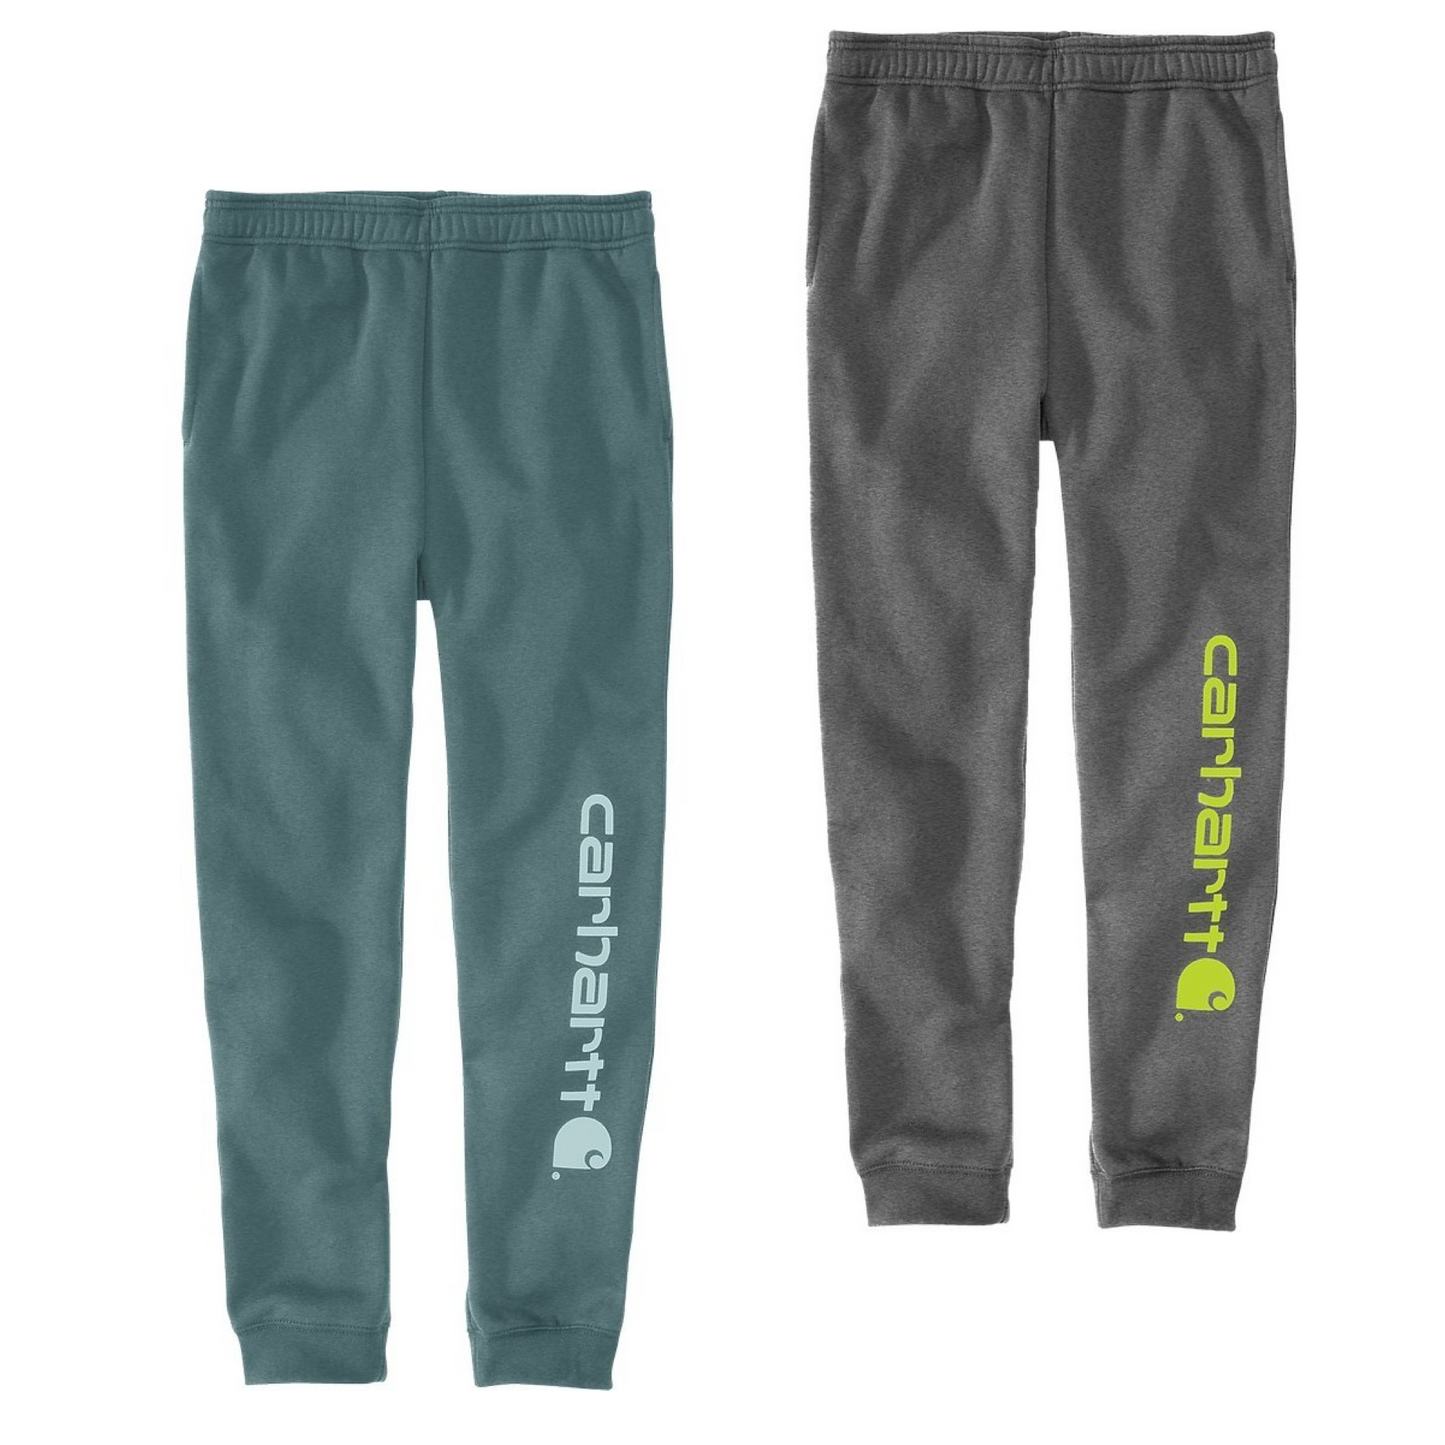 Carhartt Jogginghose Midweight Tapered Graphic Sweatpant 105899